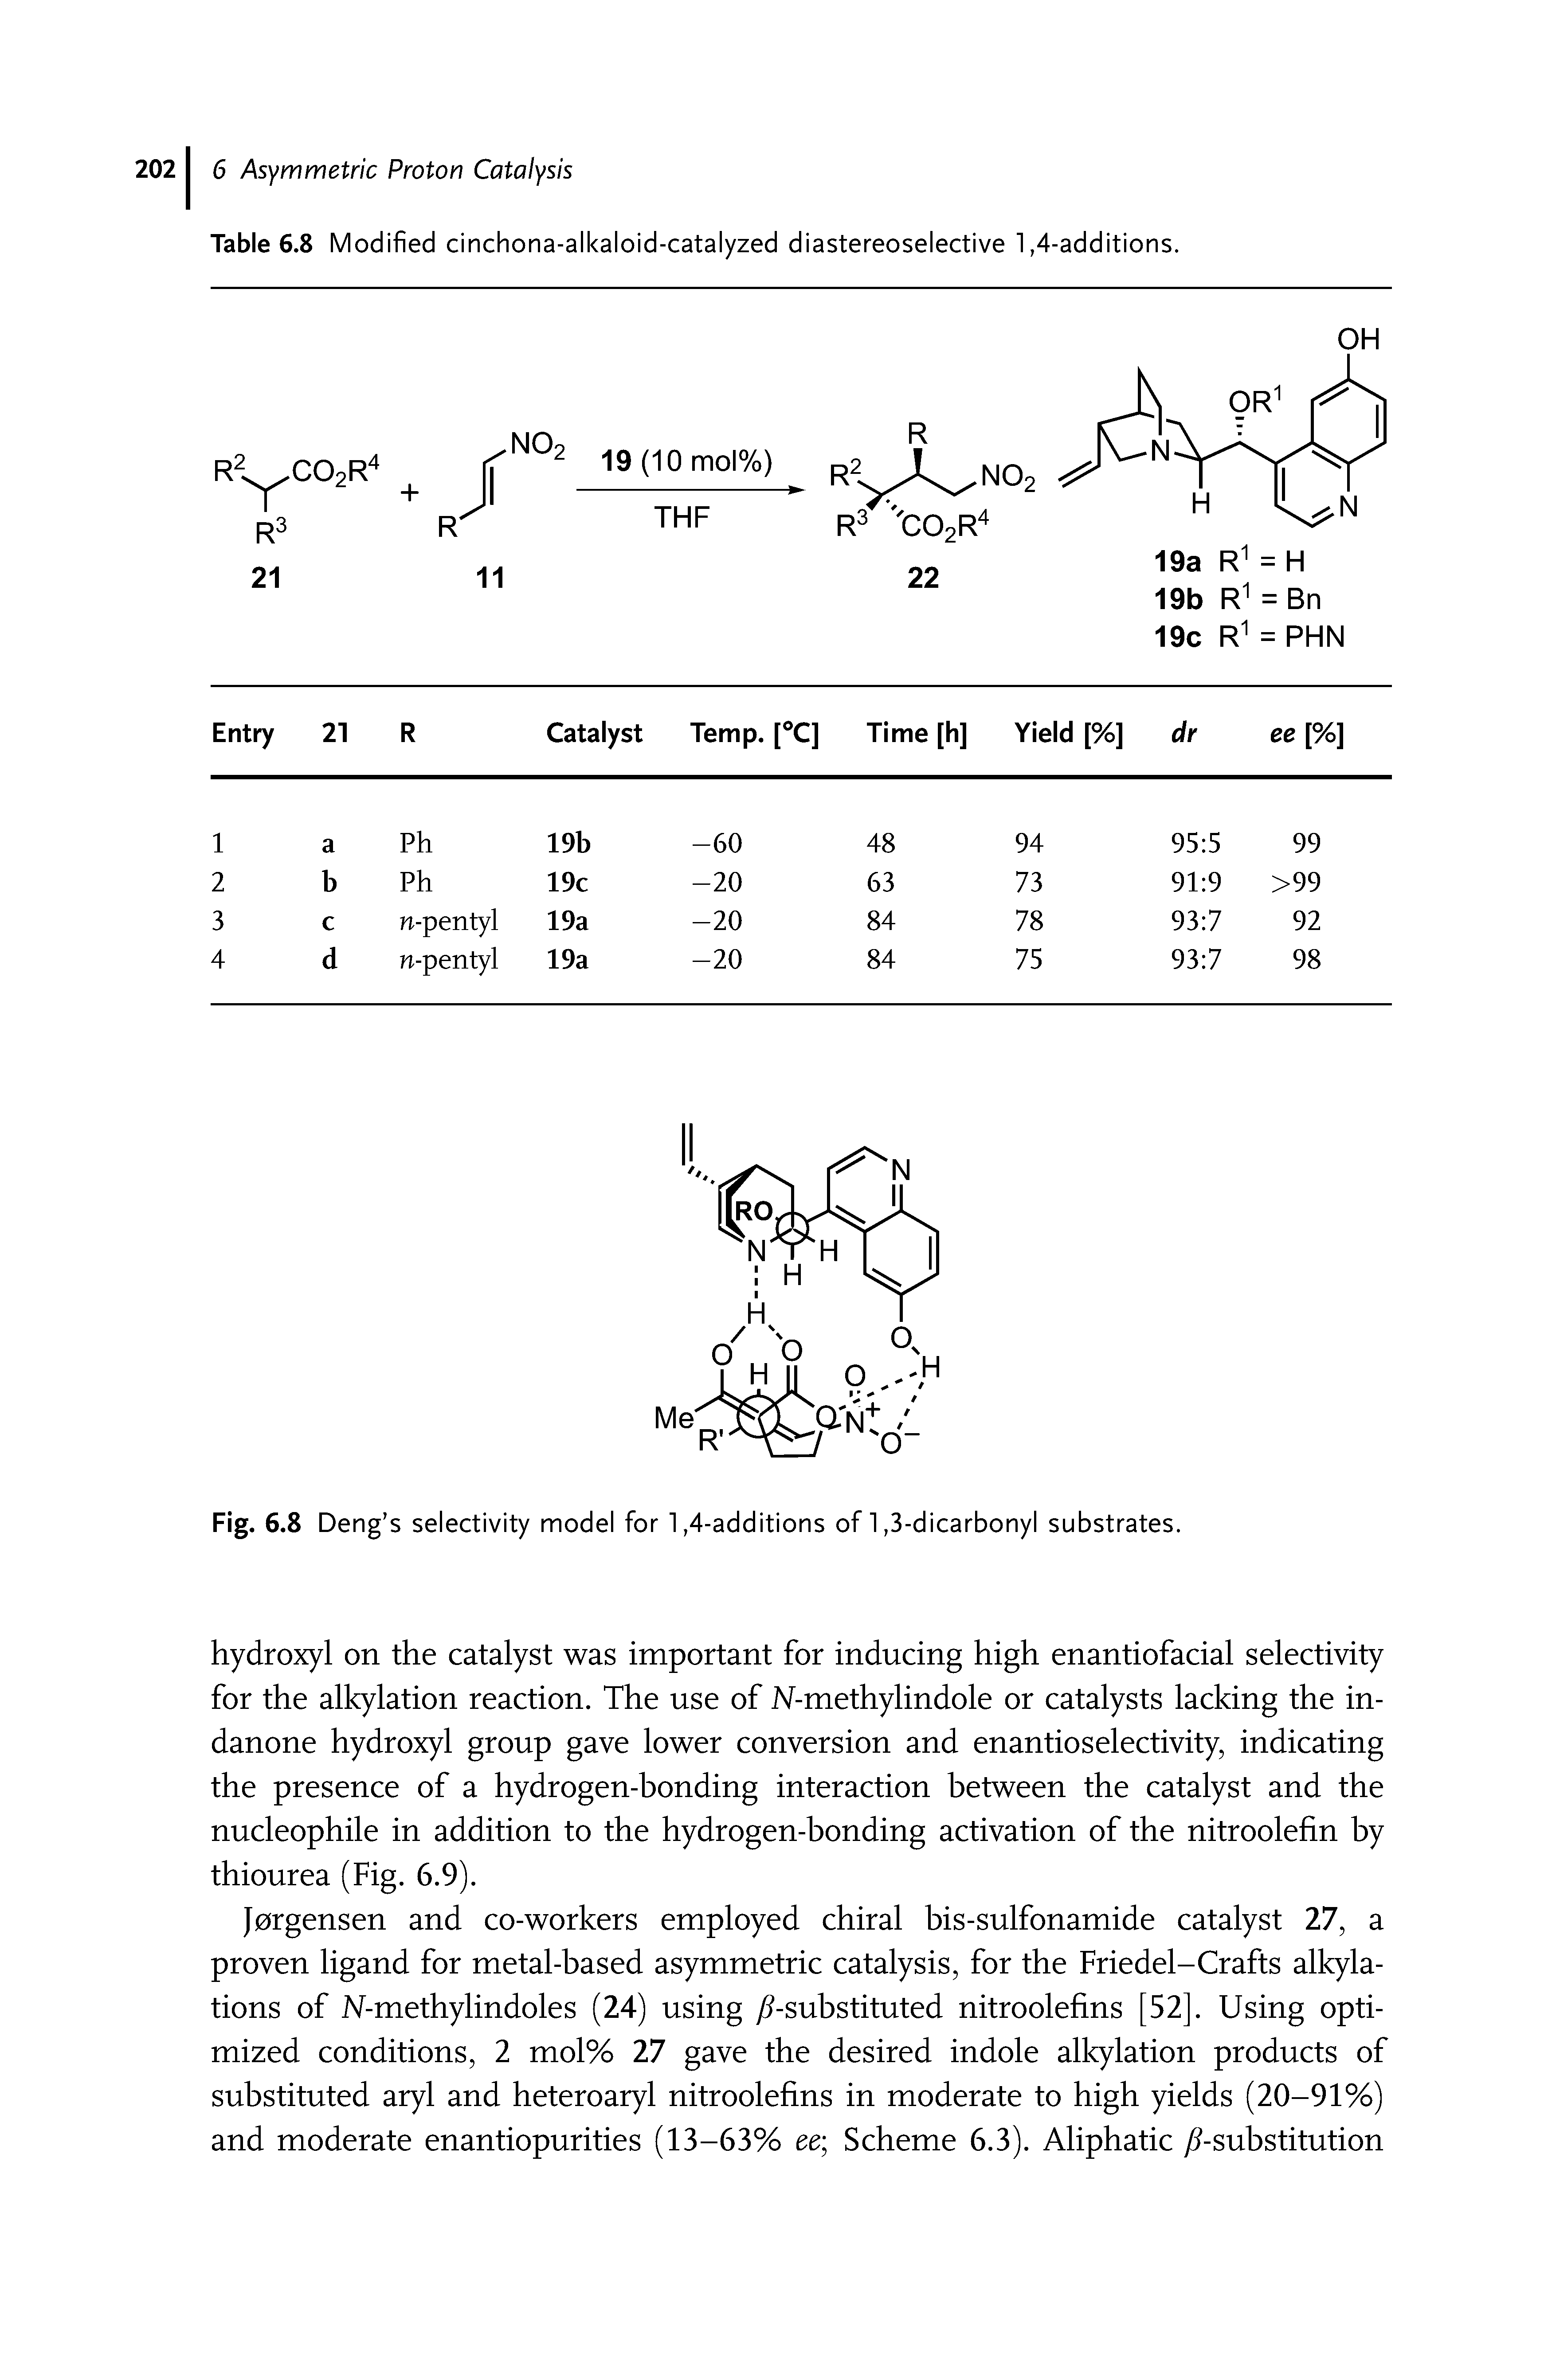 Fig. 6.8 Deng s selectivity model for 1,4-additions of 1,3-dicarbonyl substrates.